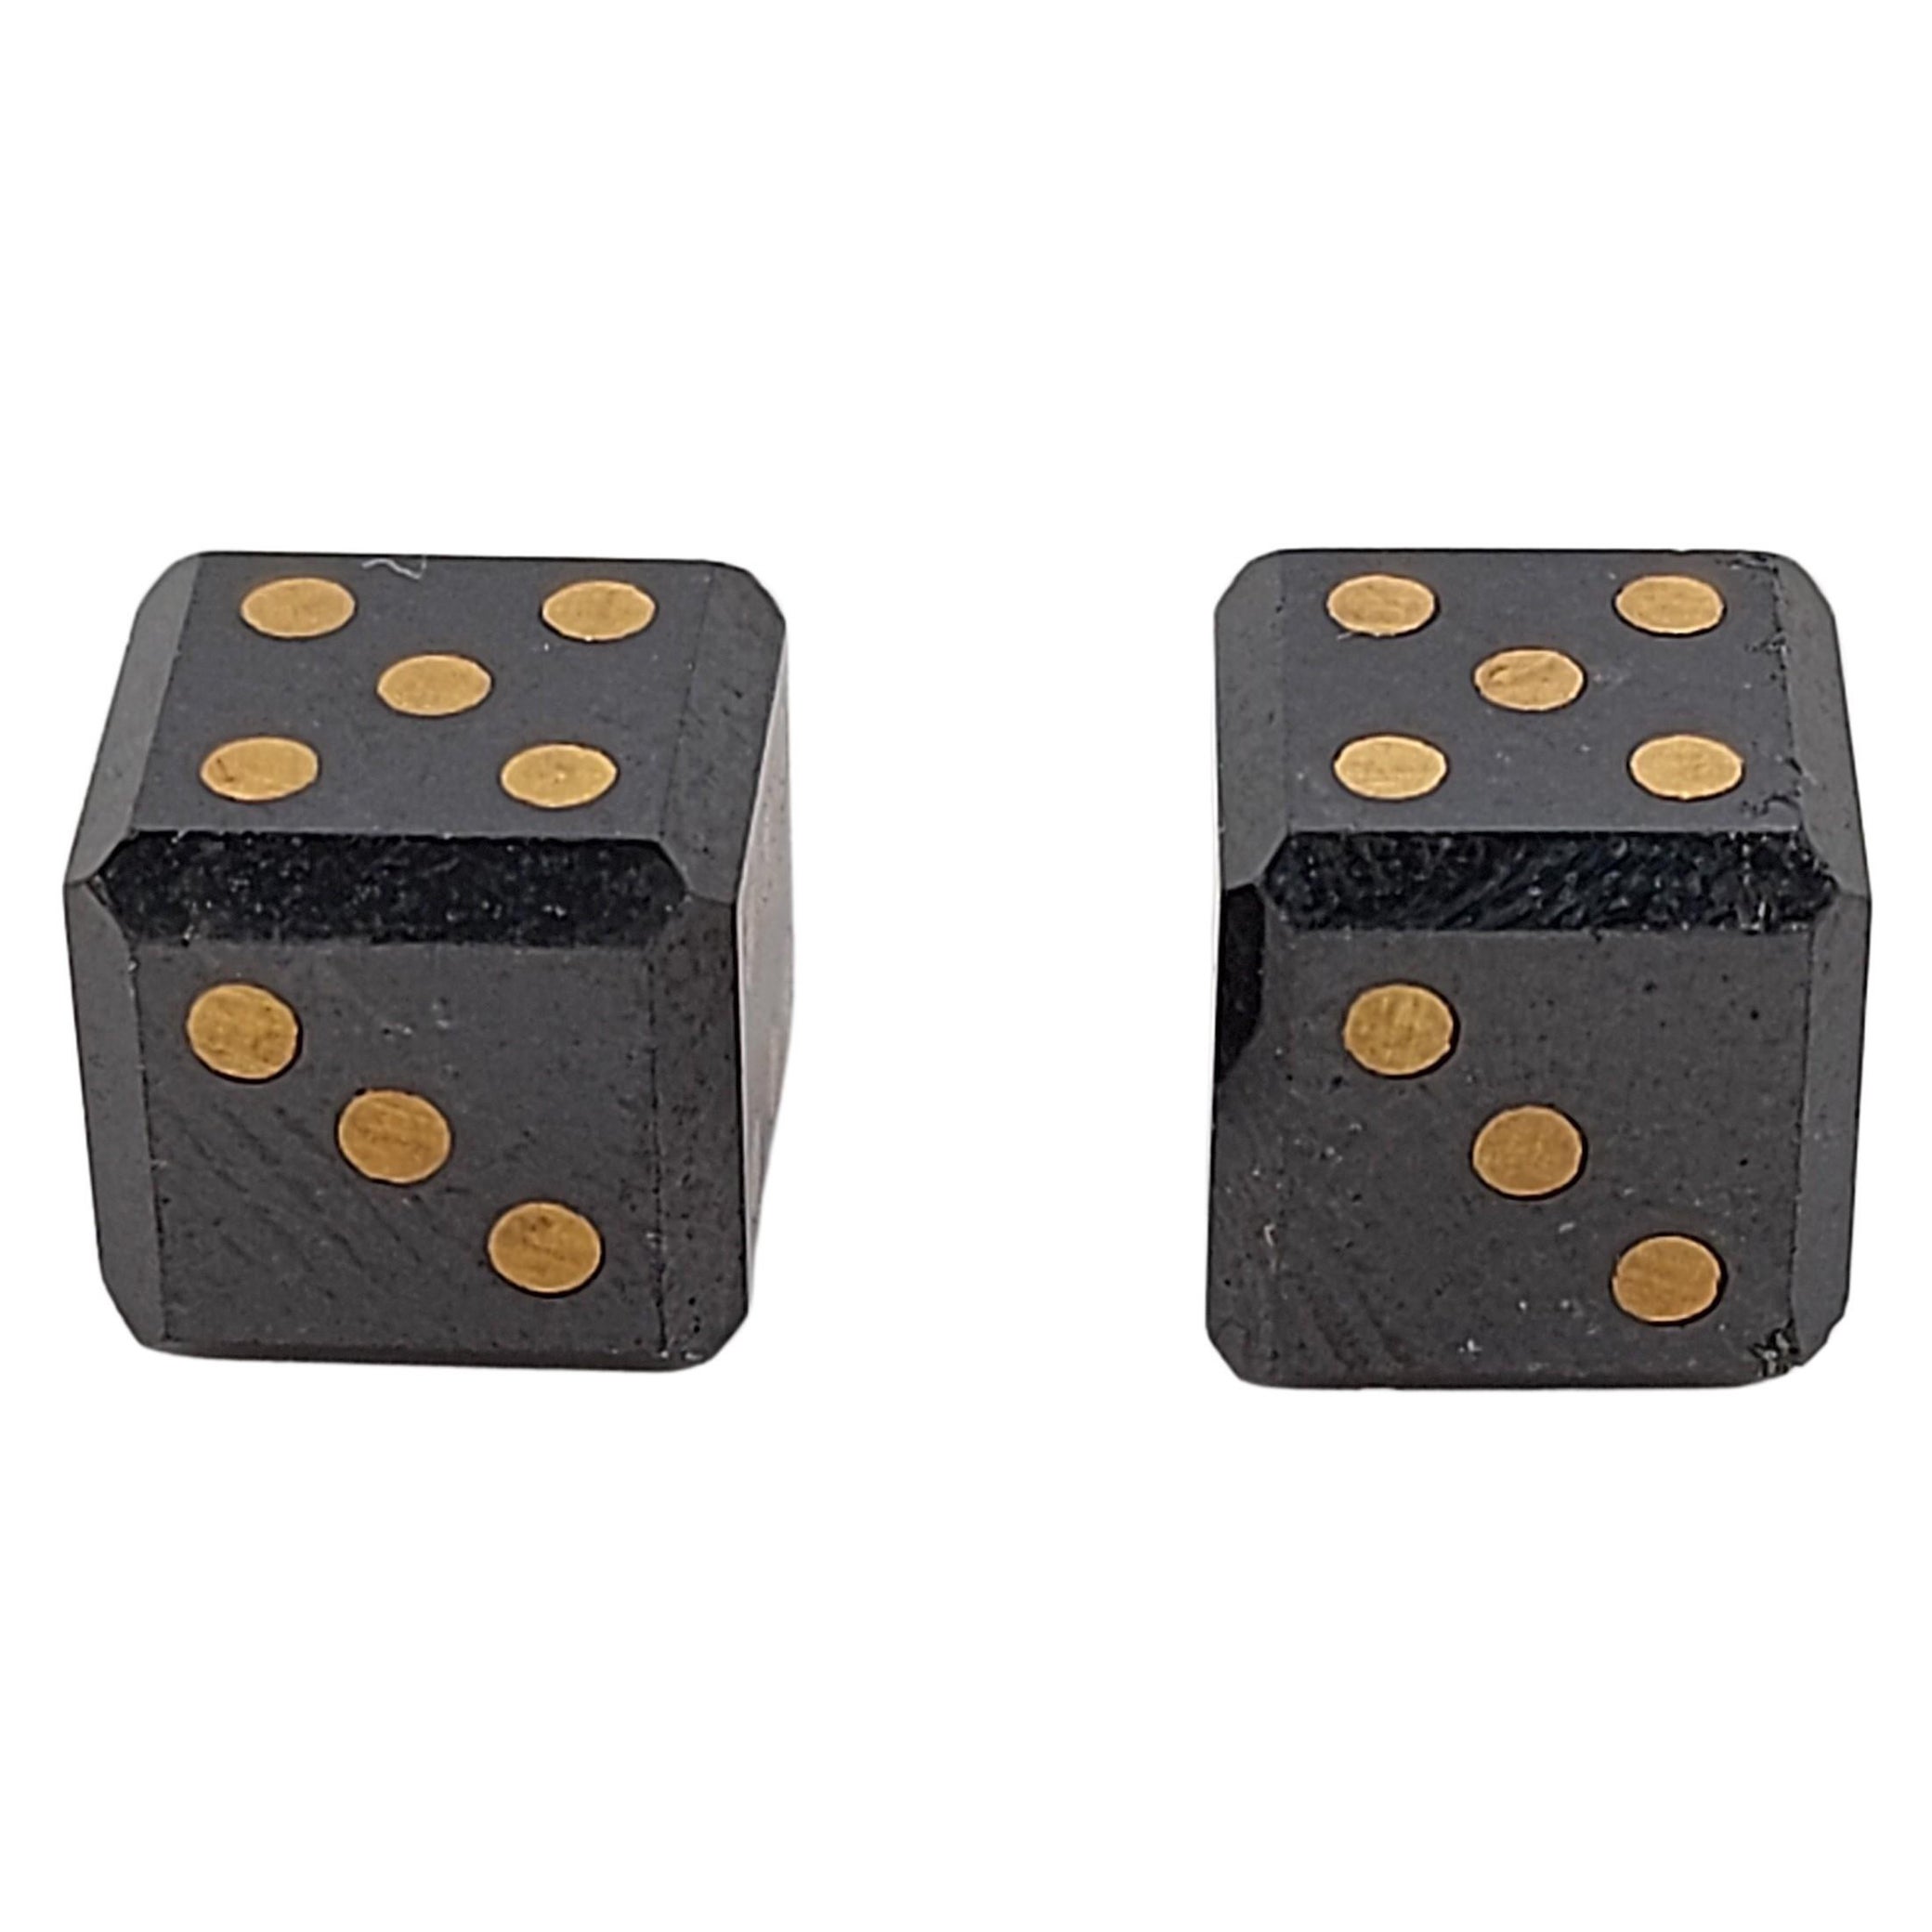 Pair of Natural Black Diamond 12, 7 Ct. Cubes/Dices with Gold Inlay